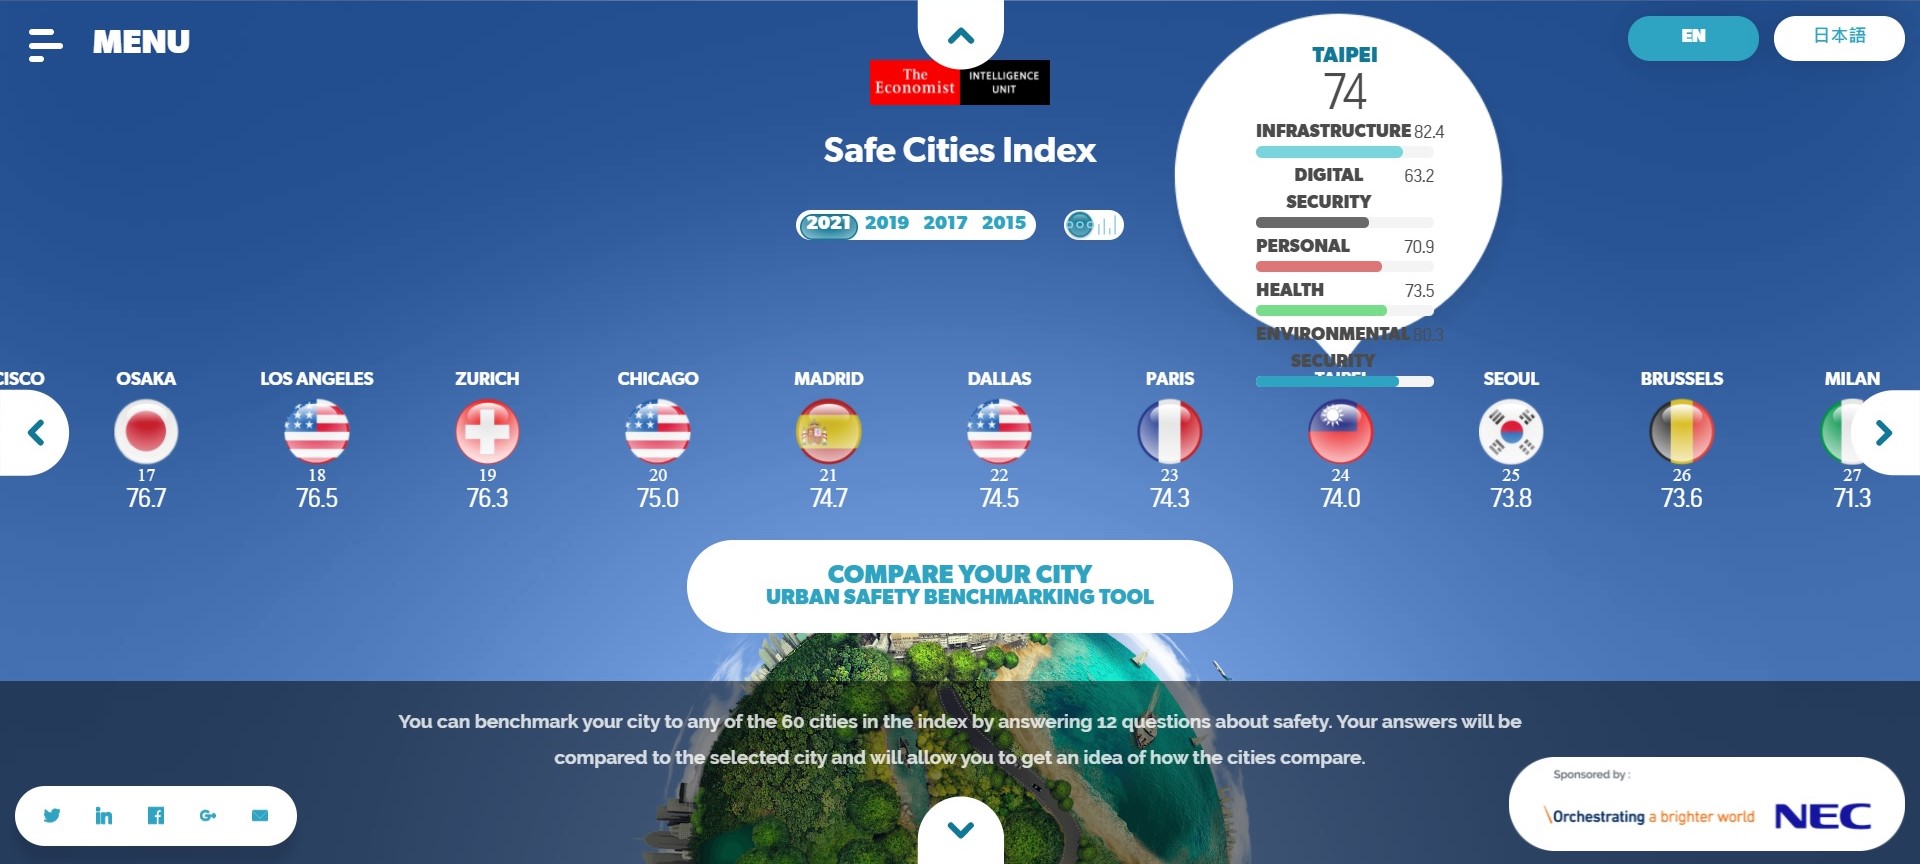 In the 2021 Safe Cities Index, Taipei ranked "4th in Asia". Photo/Retrieved from the official website